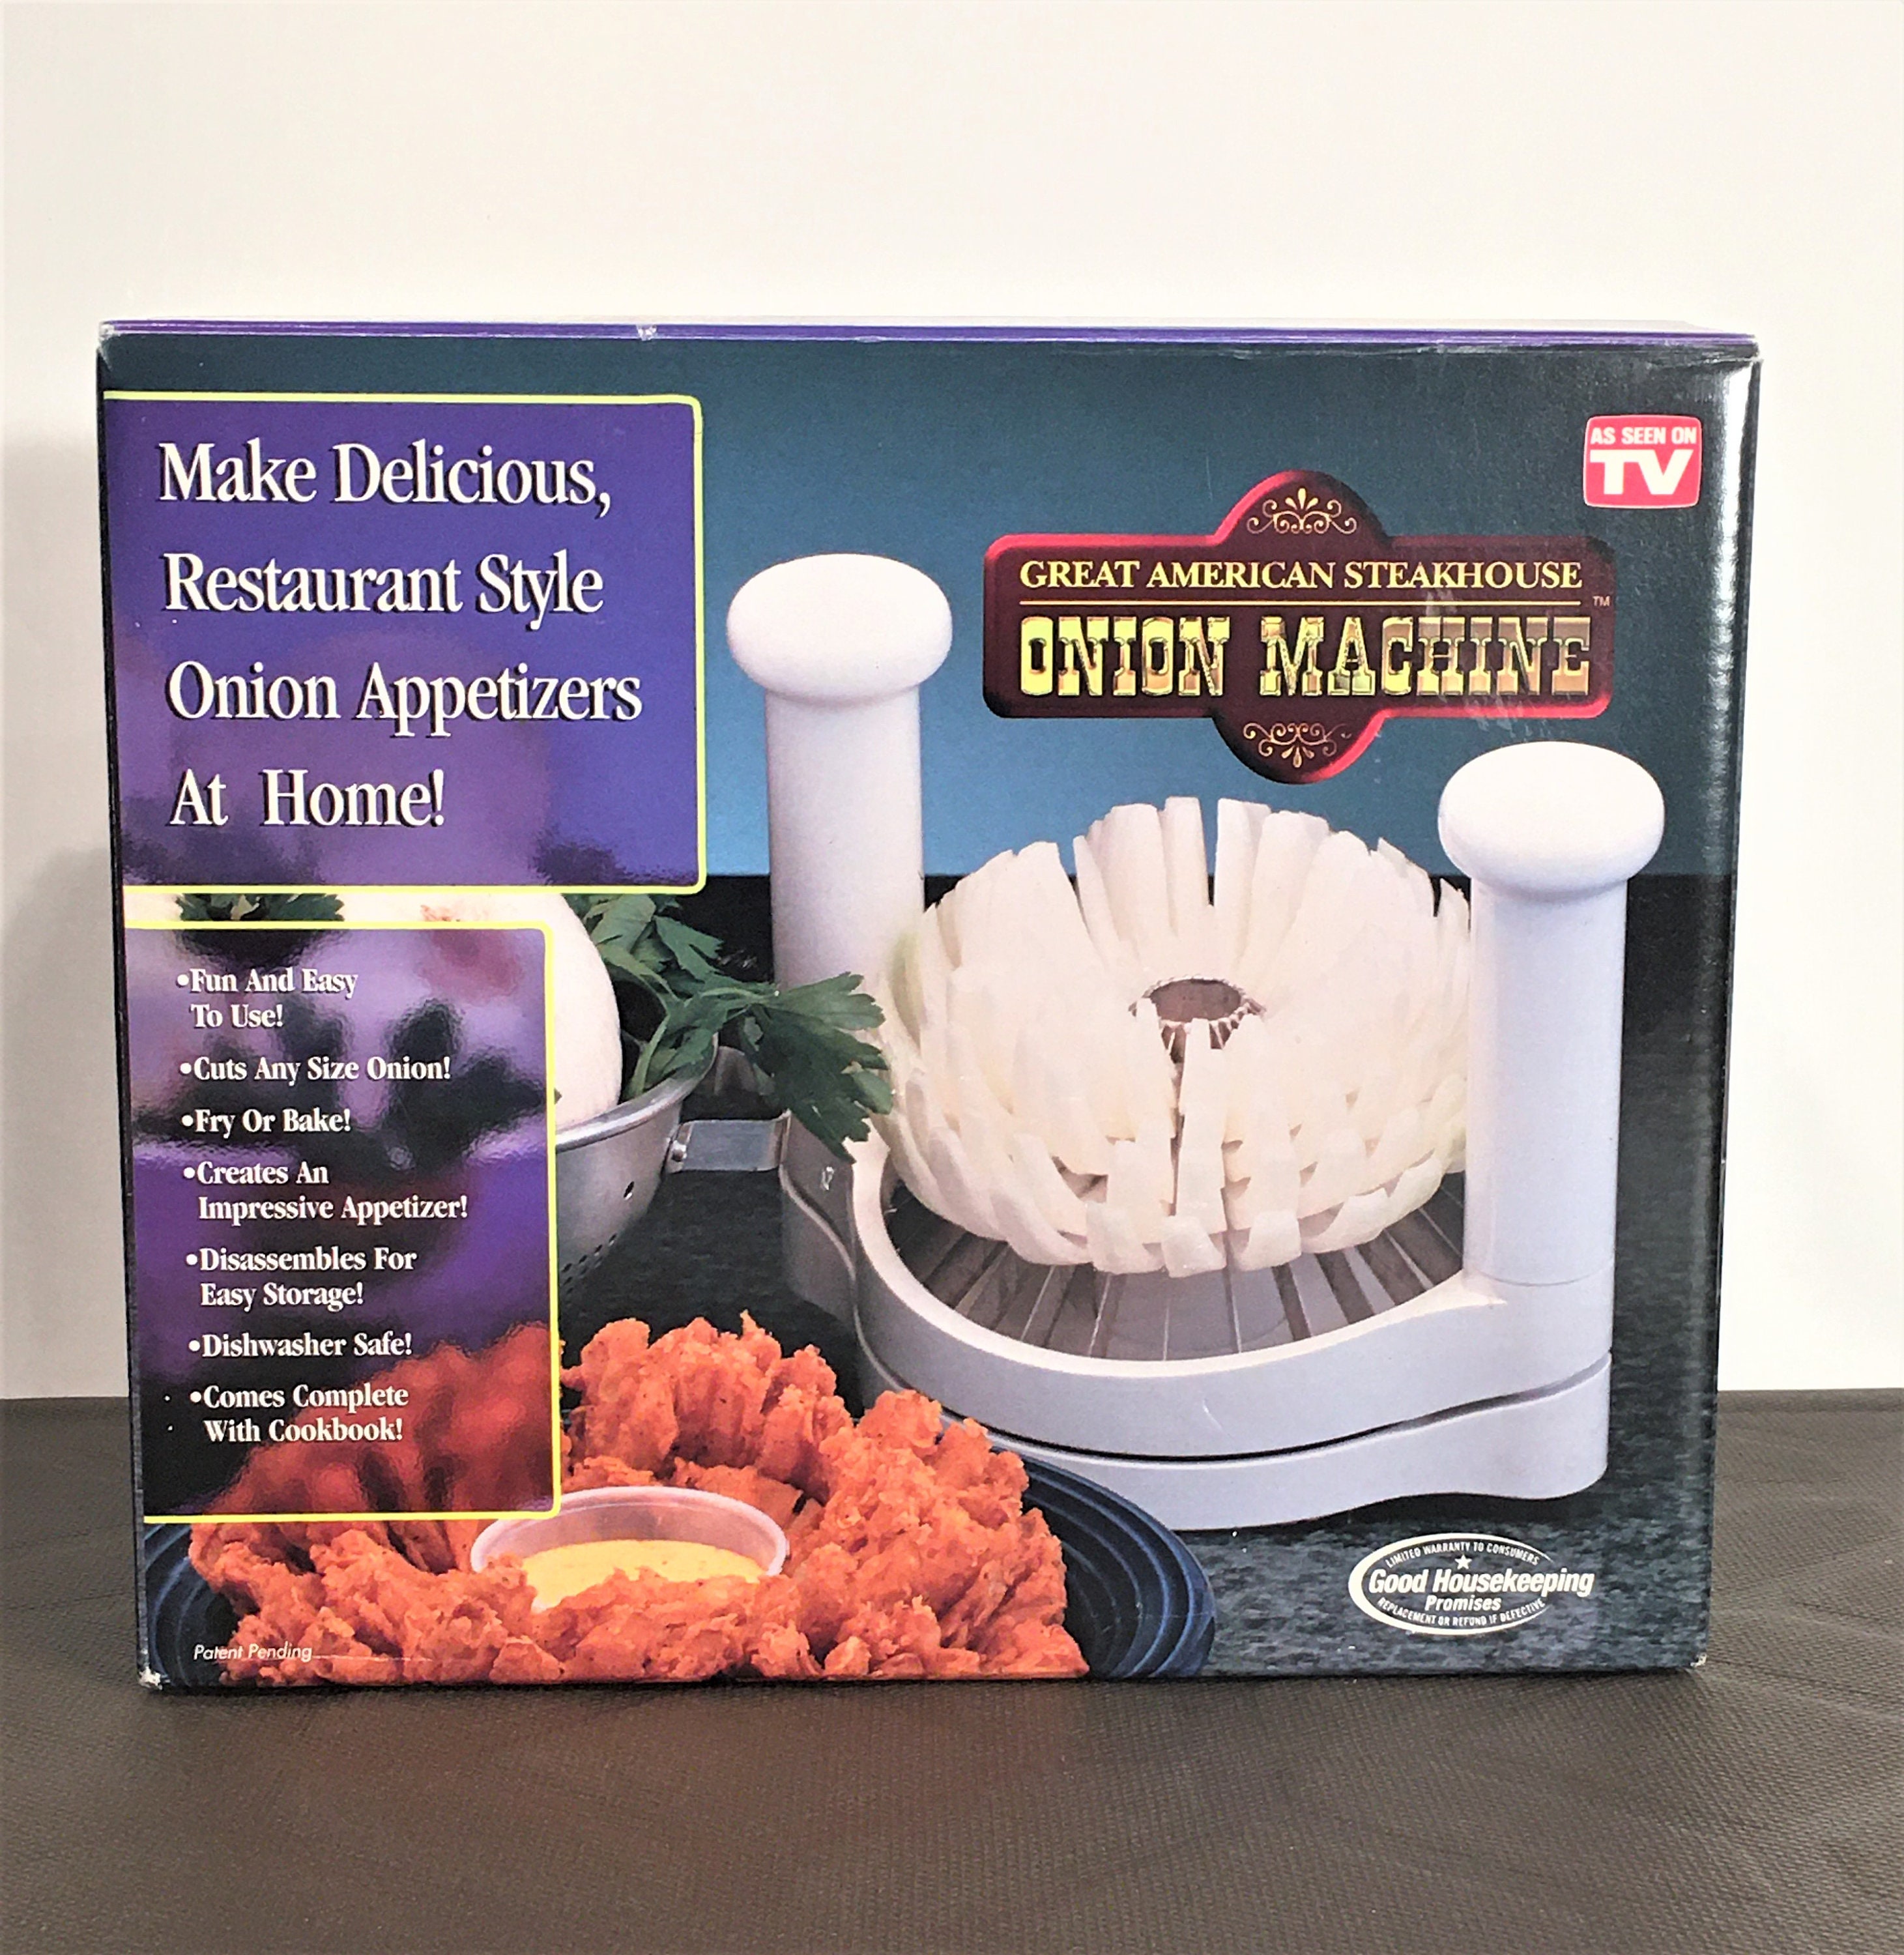 New Great American Steakhouse Onion Machine Blooming Onion Maker Seen On TV